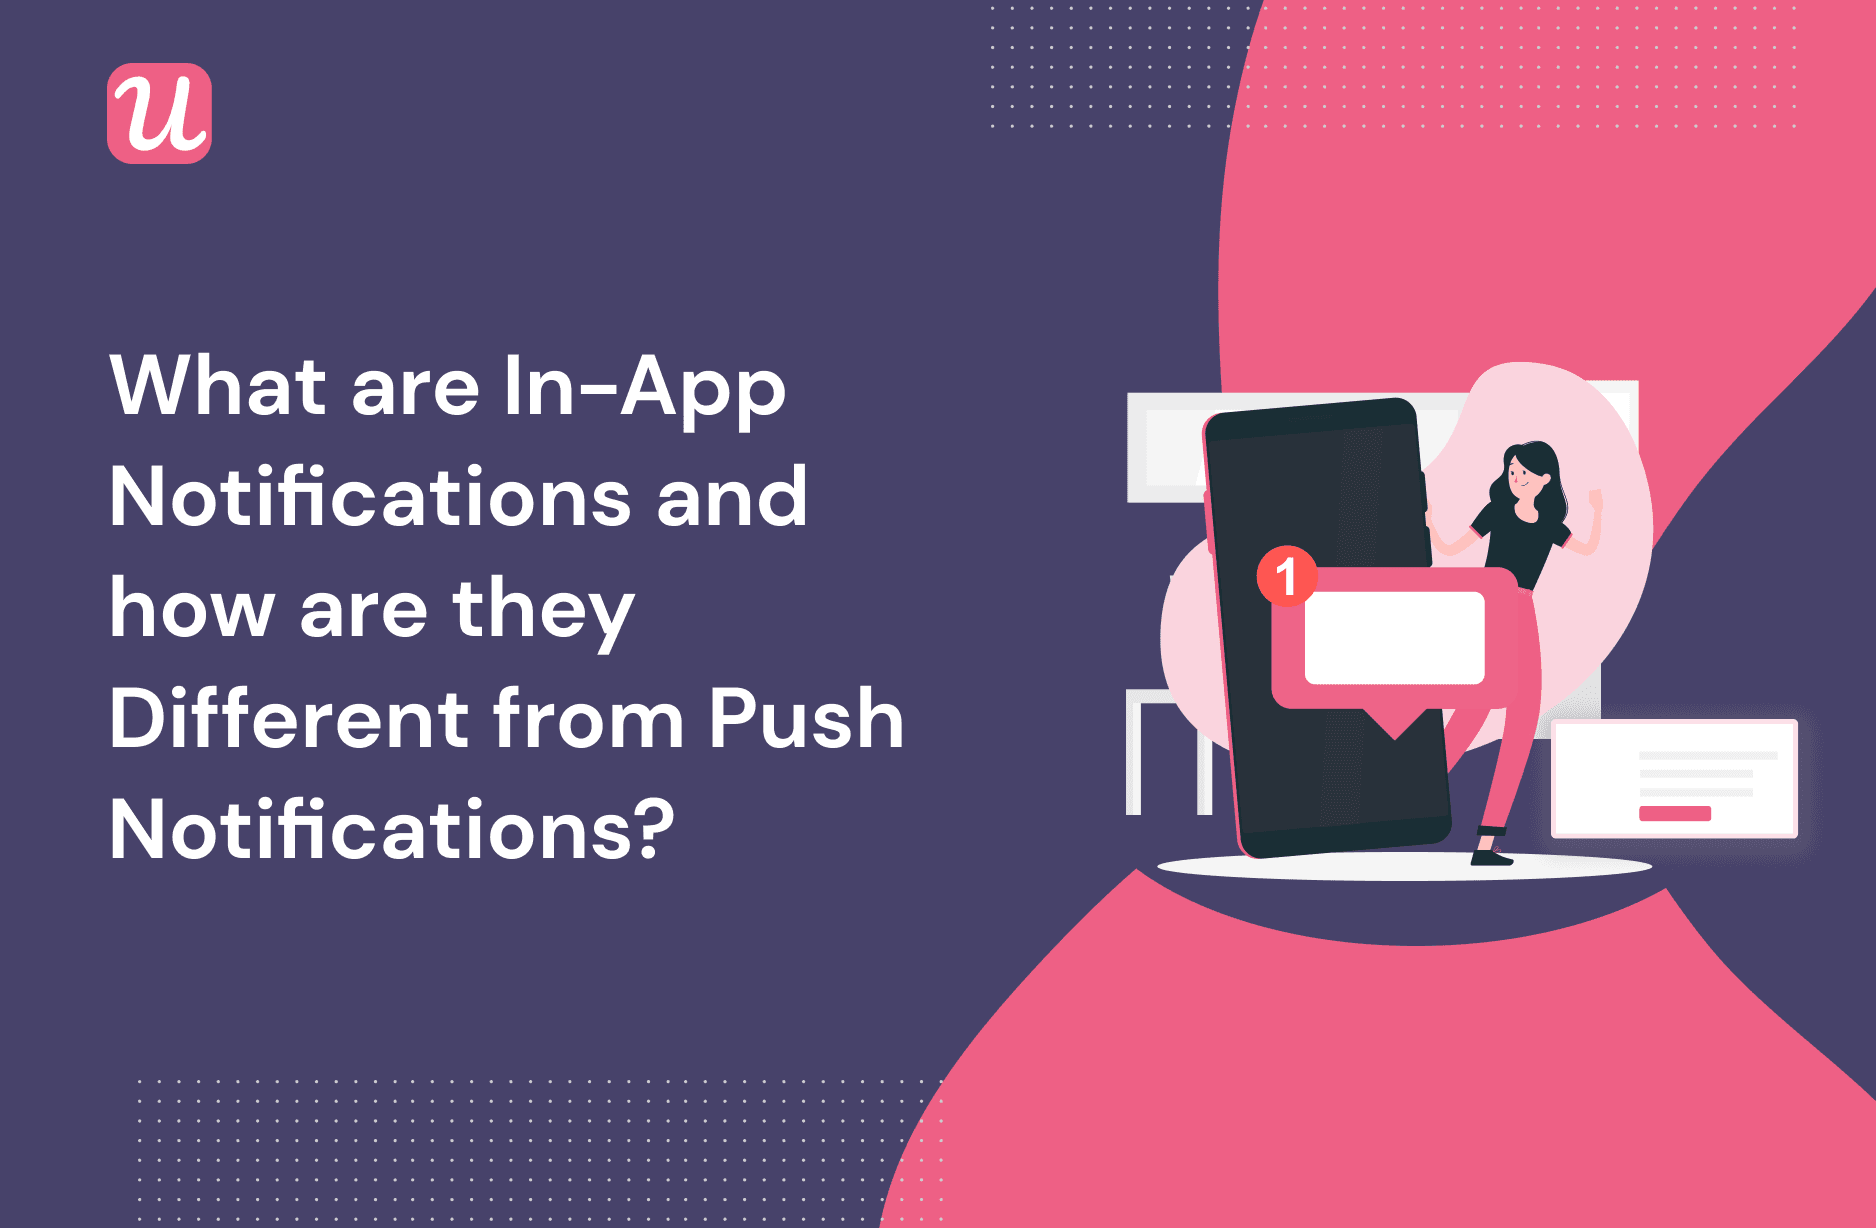 What Are In-App Notifications And How Are They Different From Push Notifications?